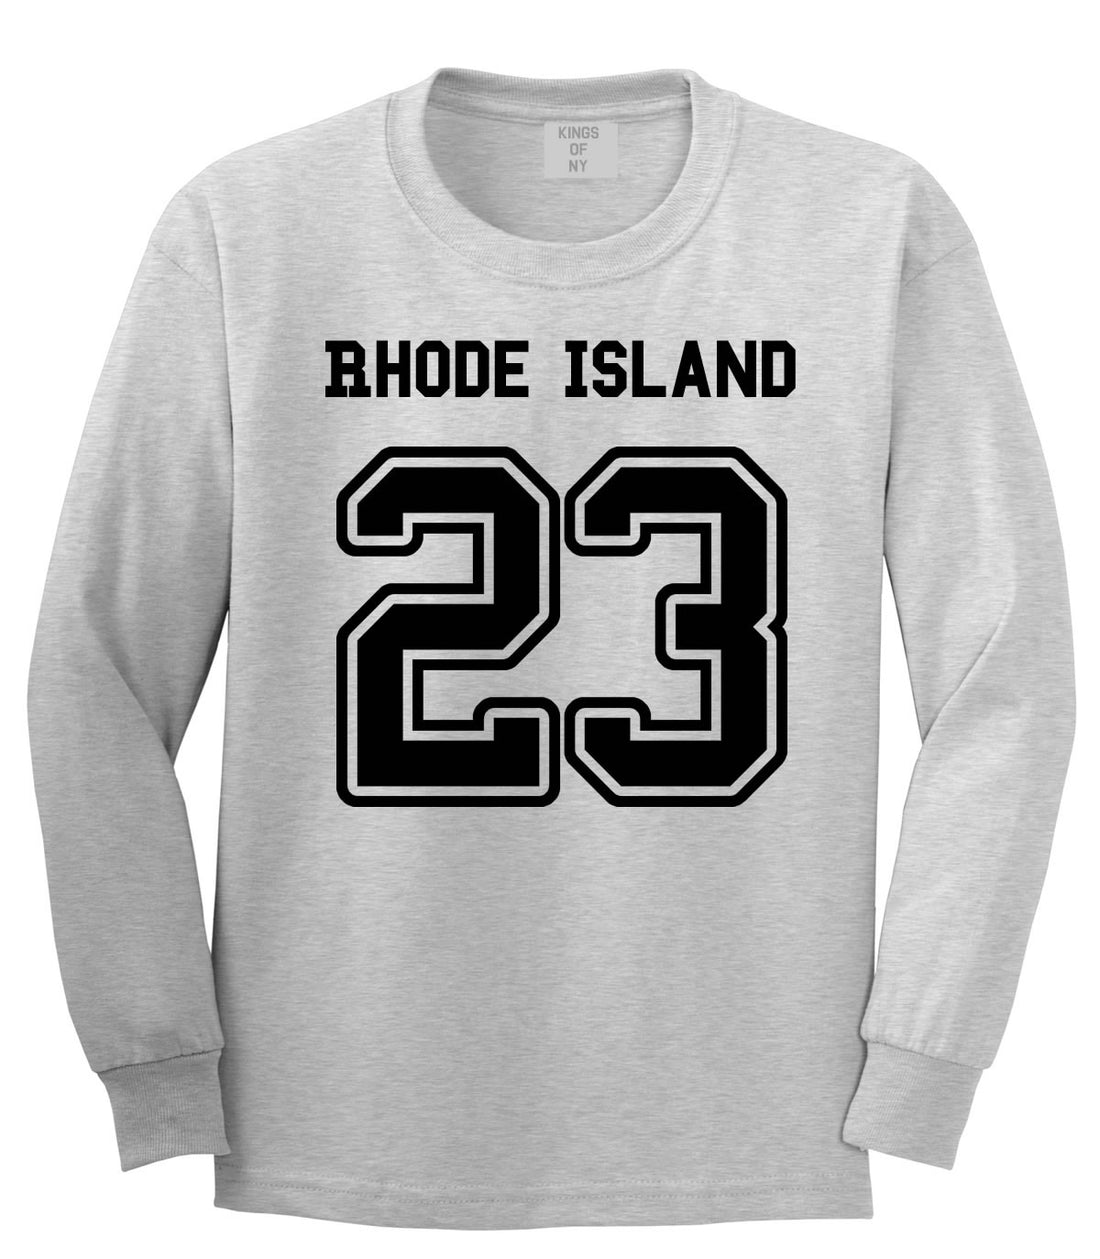 Sport Style Rhode Island 23 Team State Jersey Long Sleeve T-Shirt By Kings Of NY